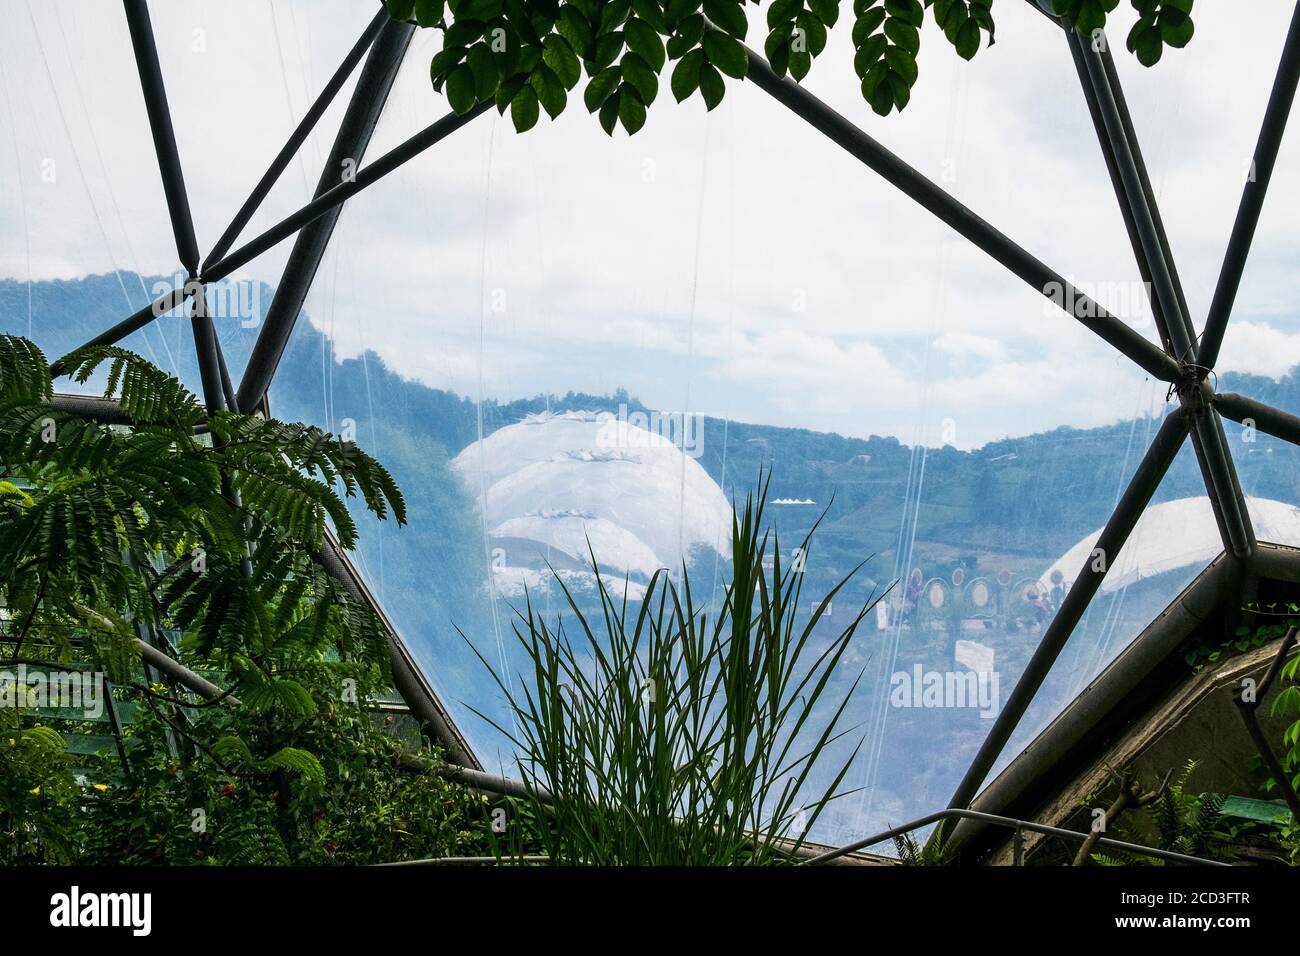 The Ethylene tetrafluorothylene film covering the rainforest biome at the Eden project complex in Cornwall. Stock Photo